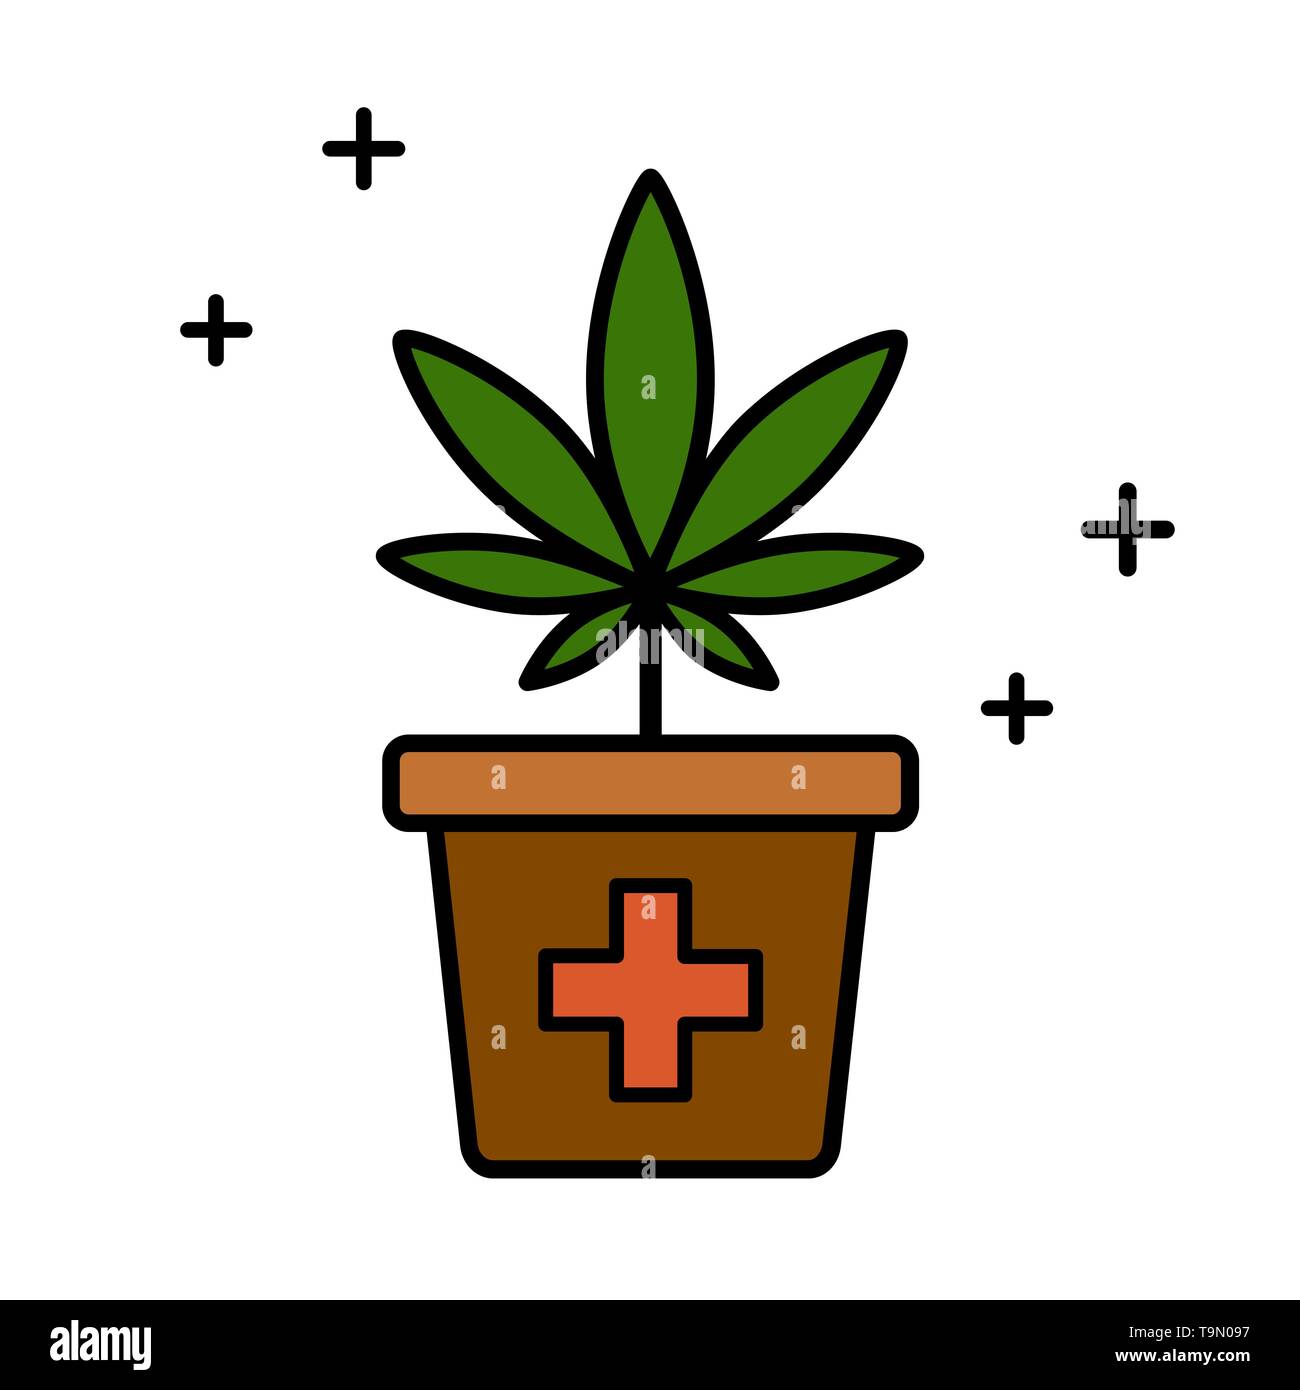 Cannabis plant in a flower pot. Medical marijuana. Isolated vector illustration on white background. Stock Vector